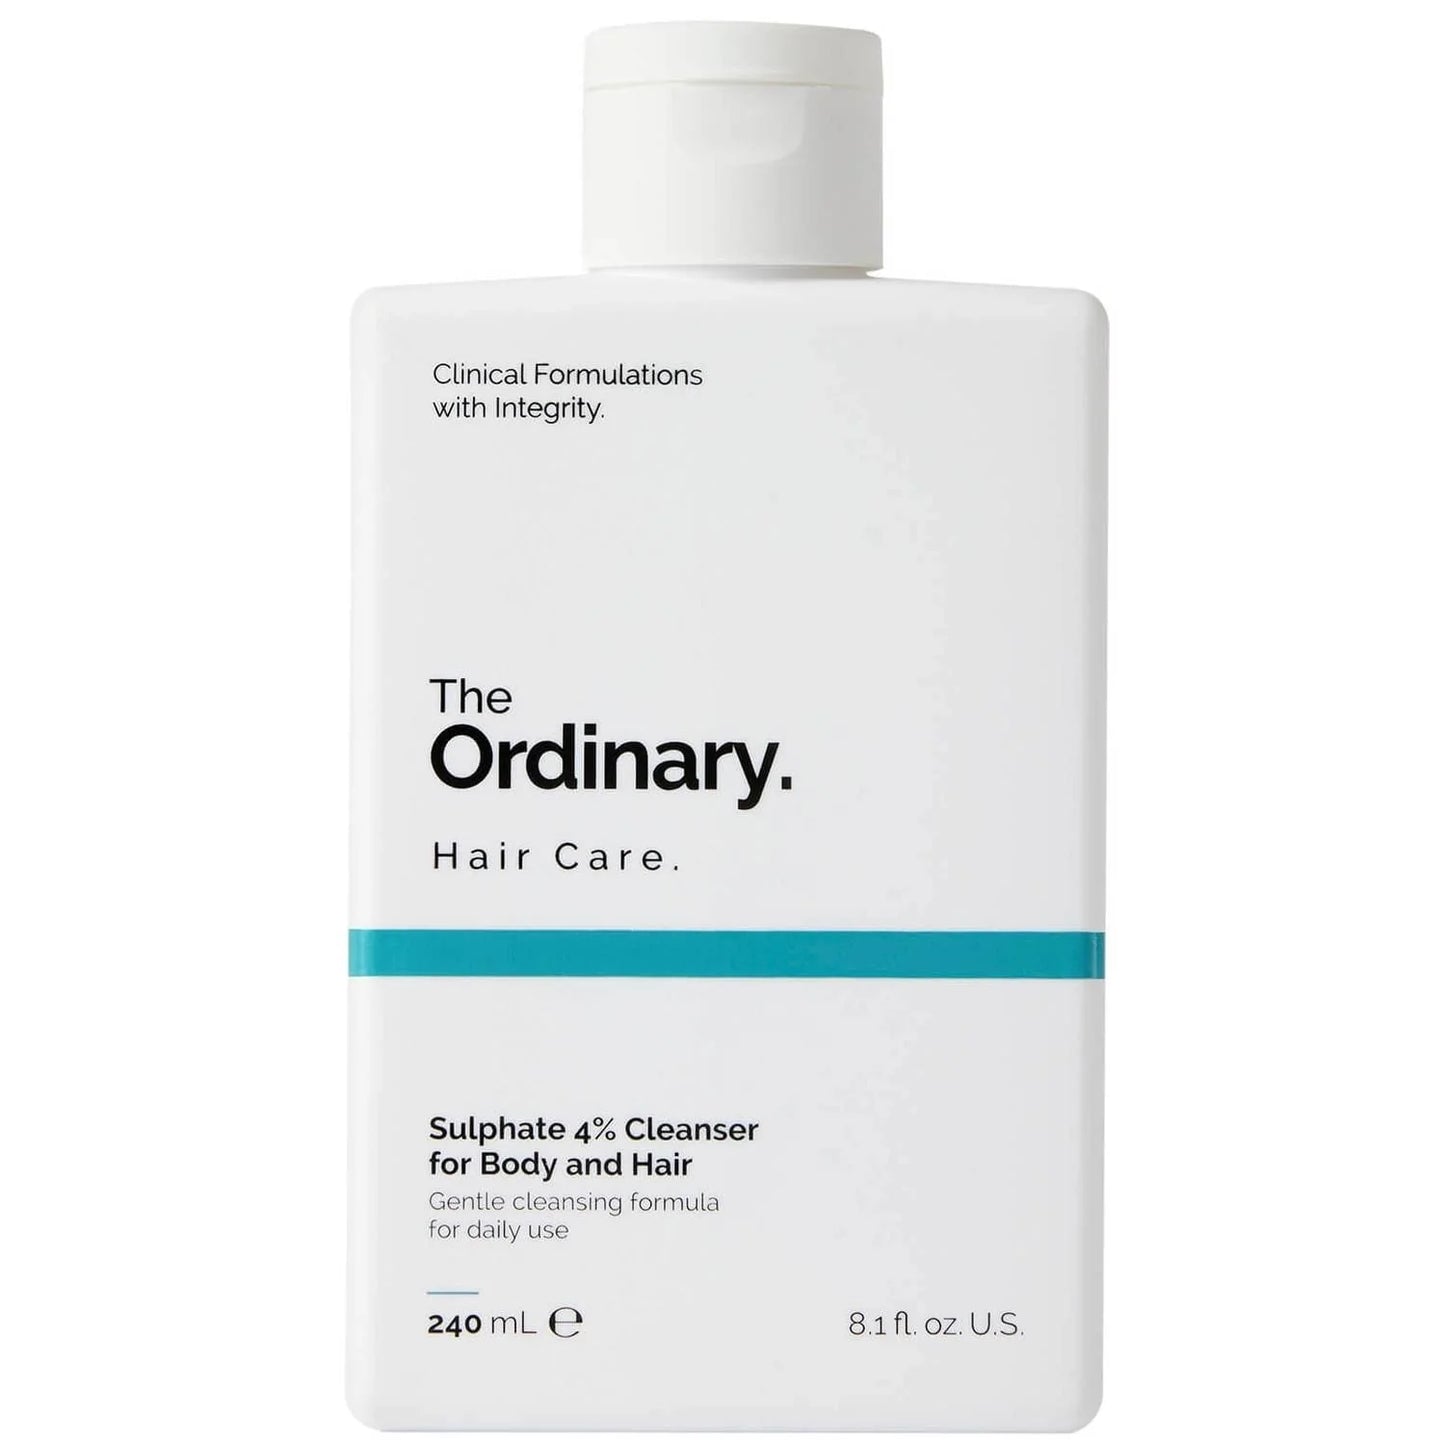 The Ordinary Beauty The Ordinary Sulphate 4% Cleanser for Body and Hair 240ml